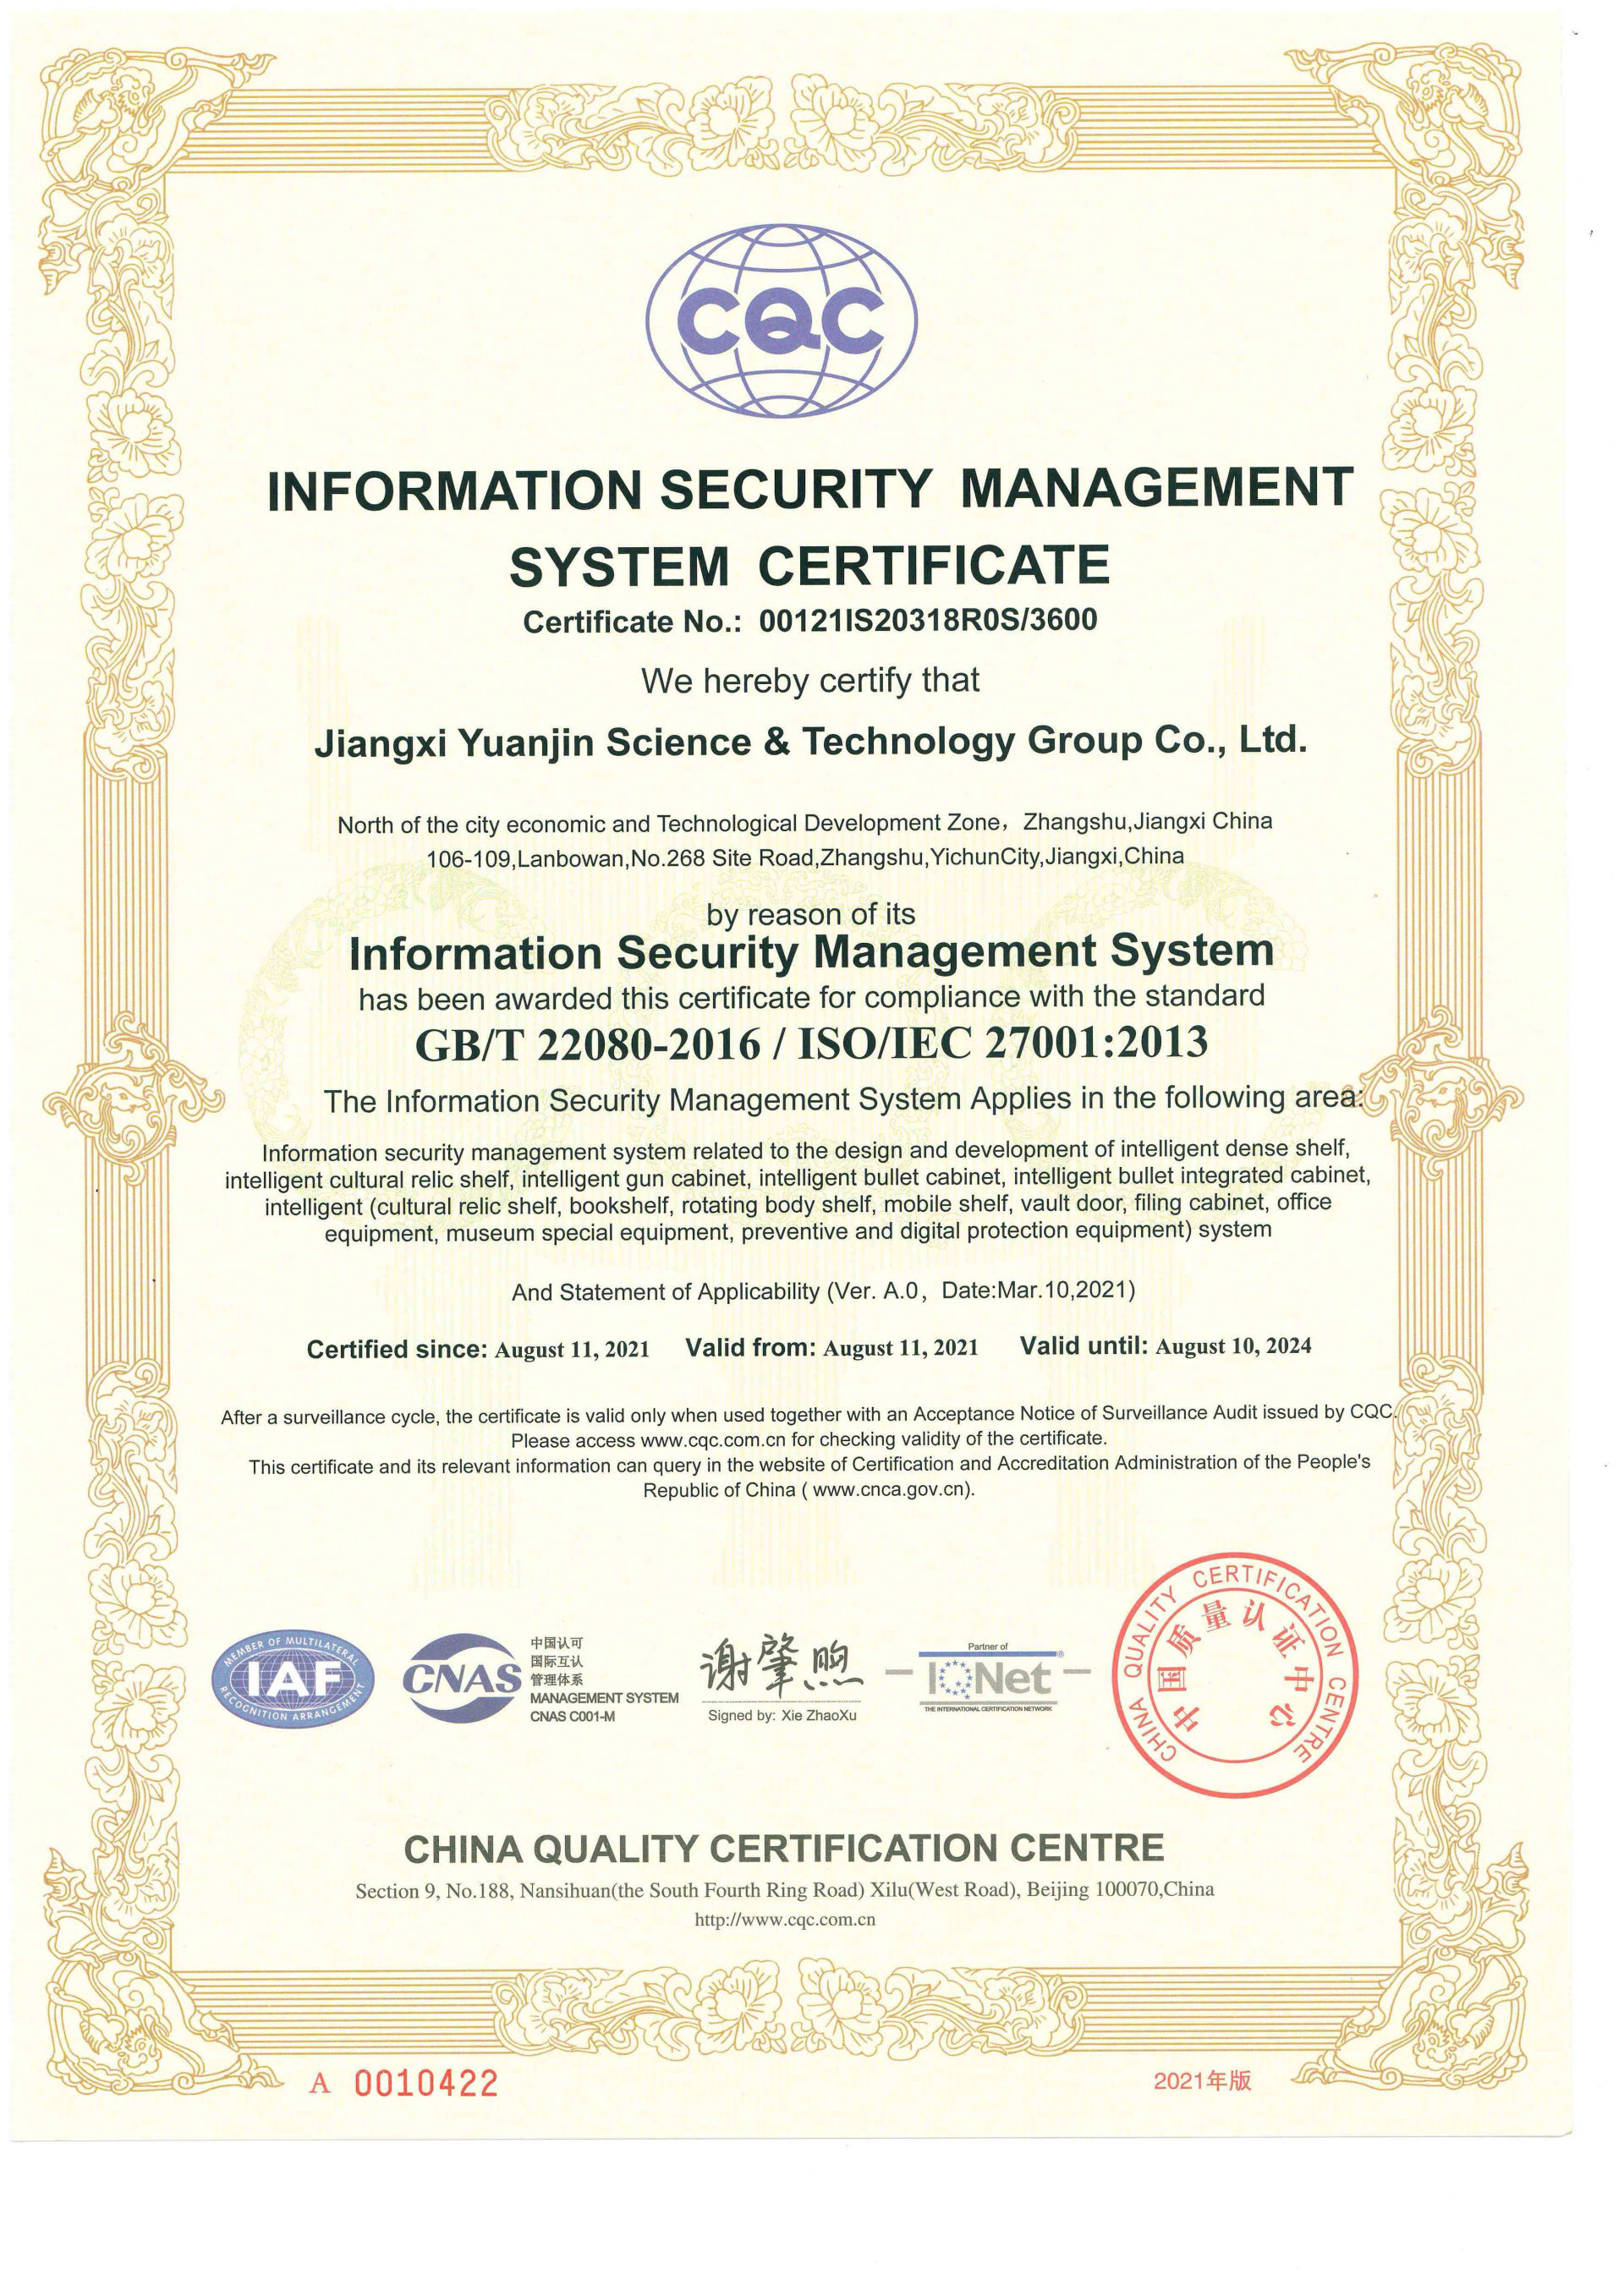 Information technology and security